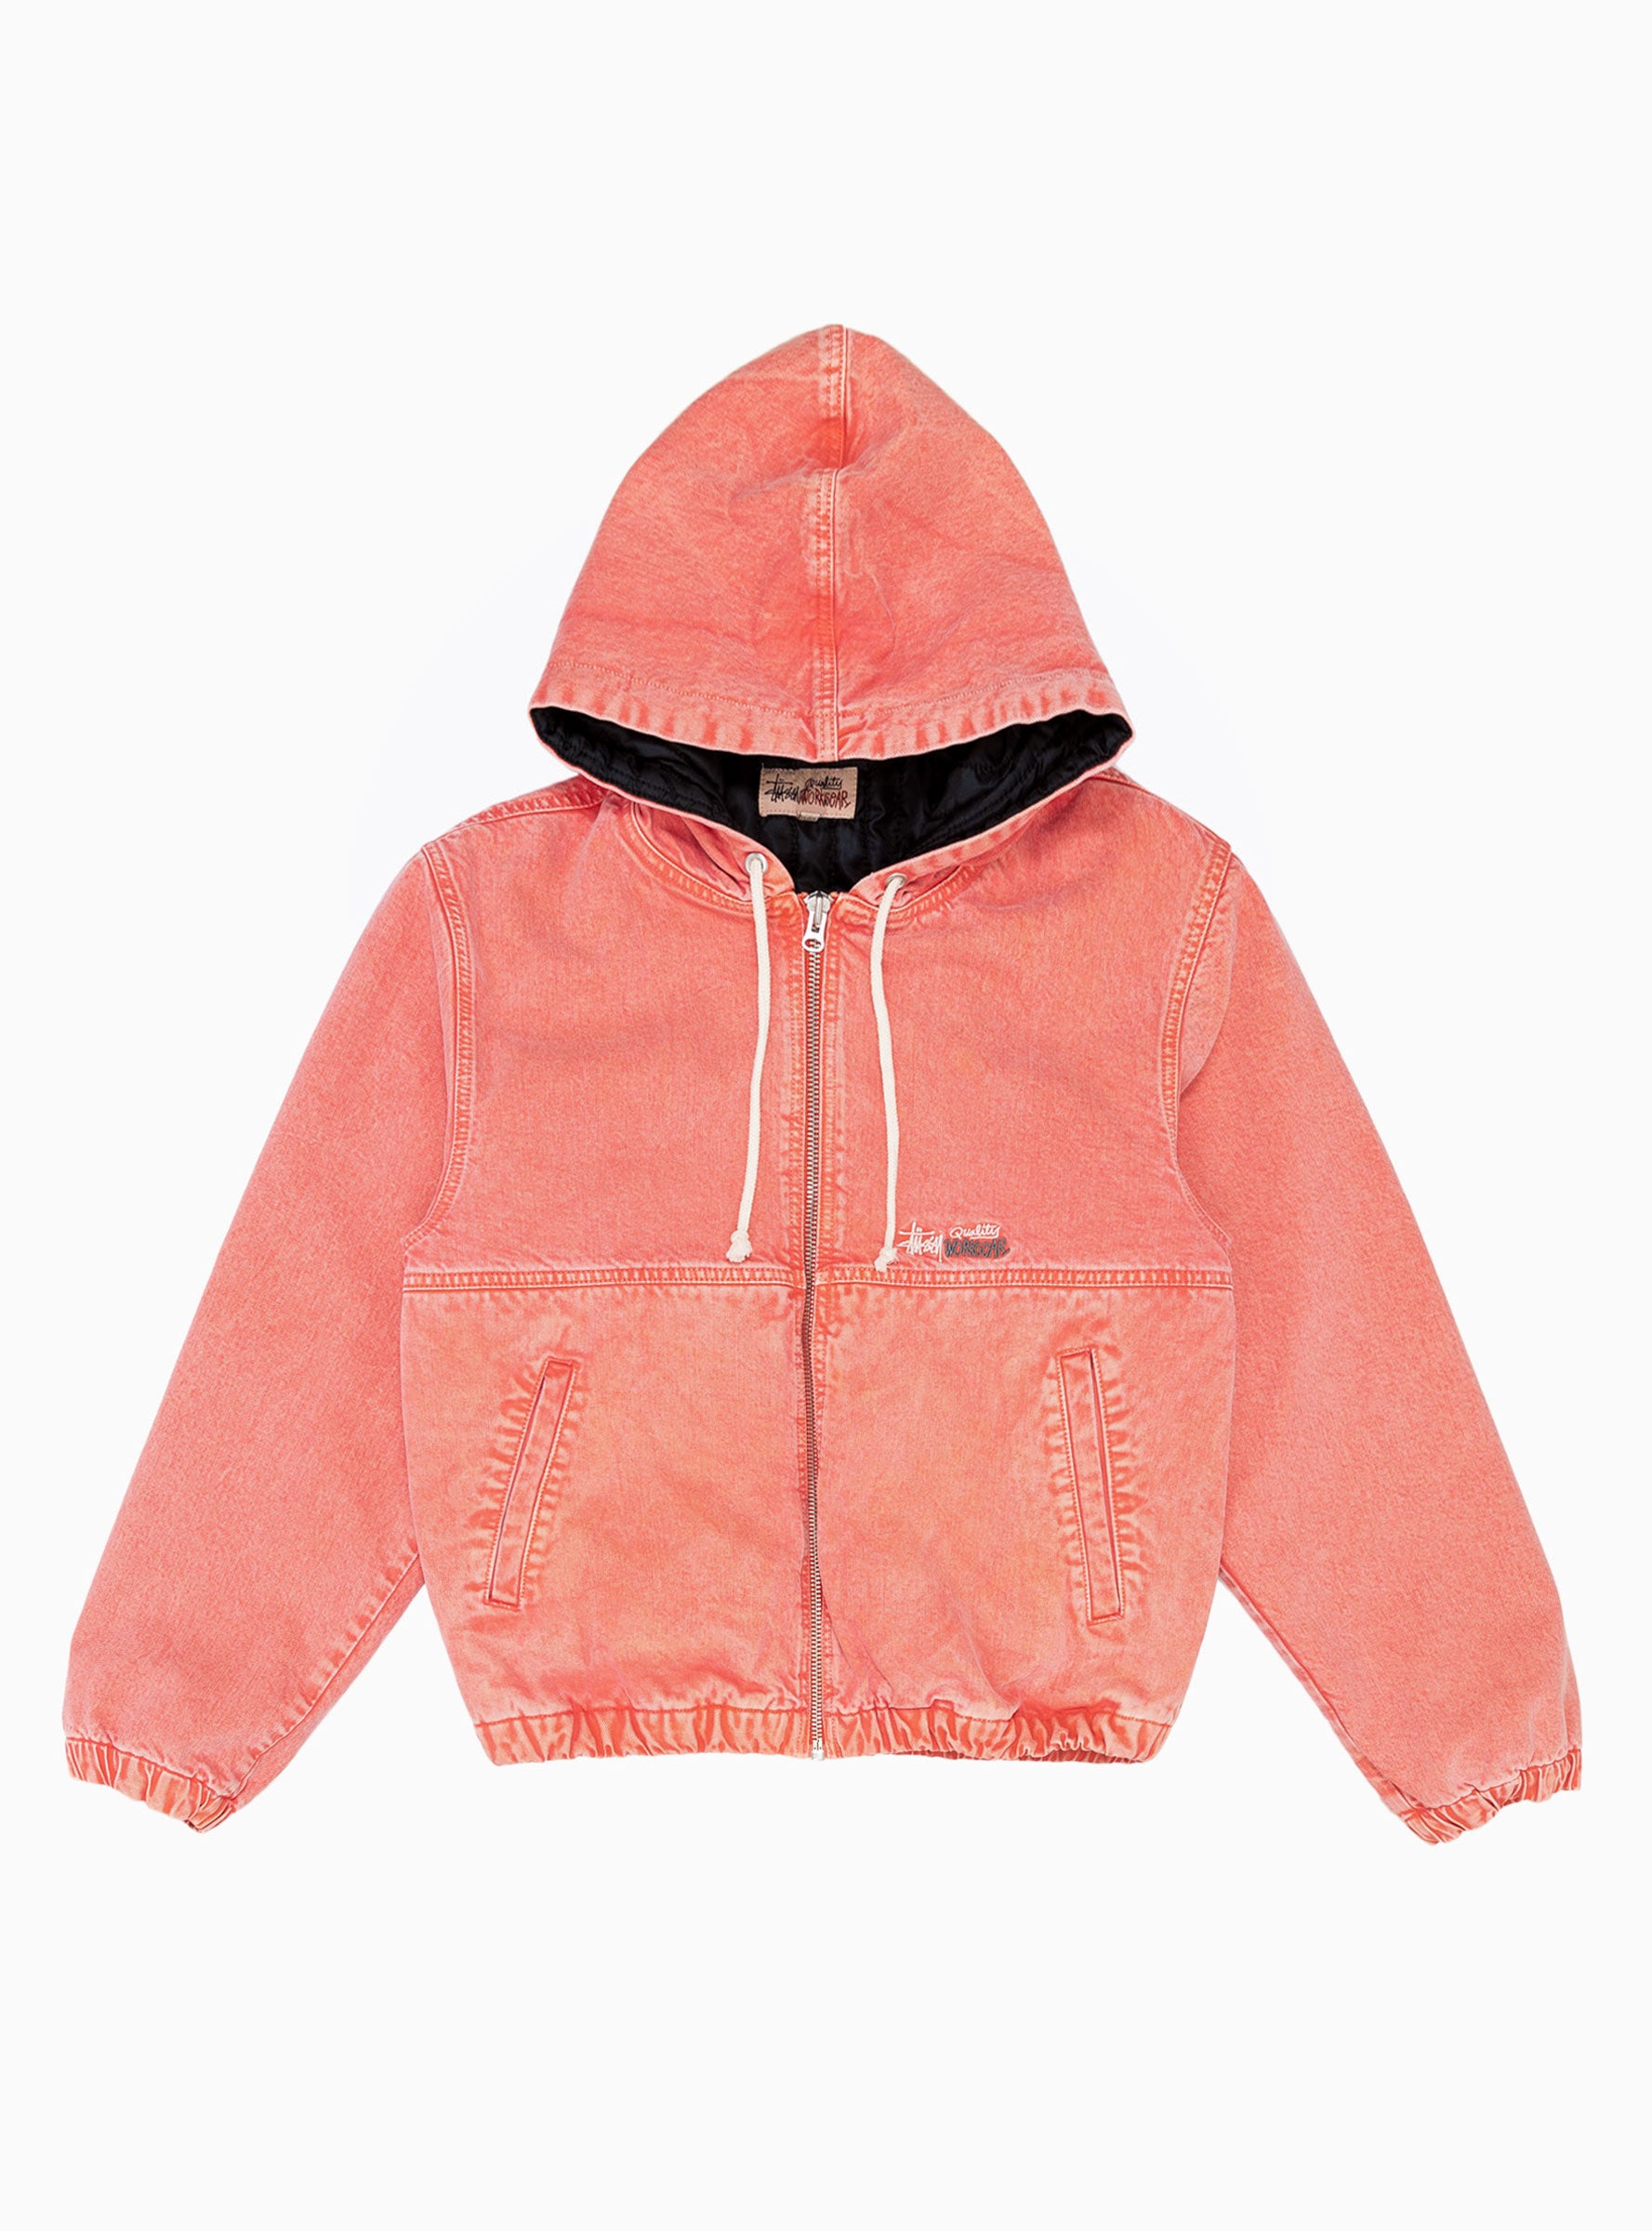 Double Dye Work Jacket Faded Red by Stüssy   Couverture & The